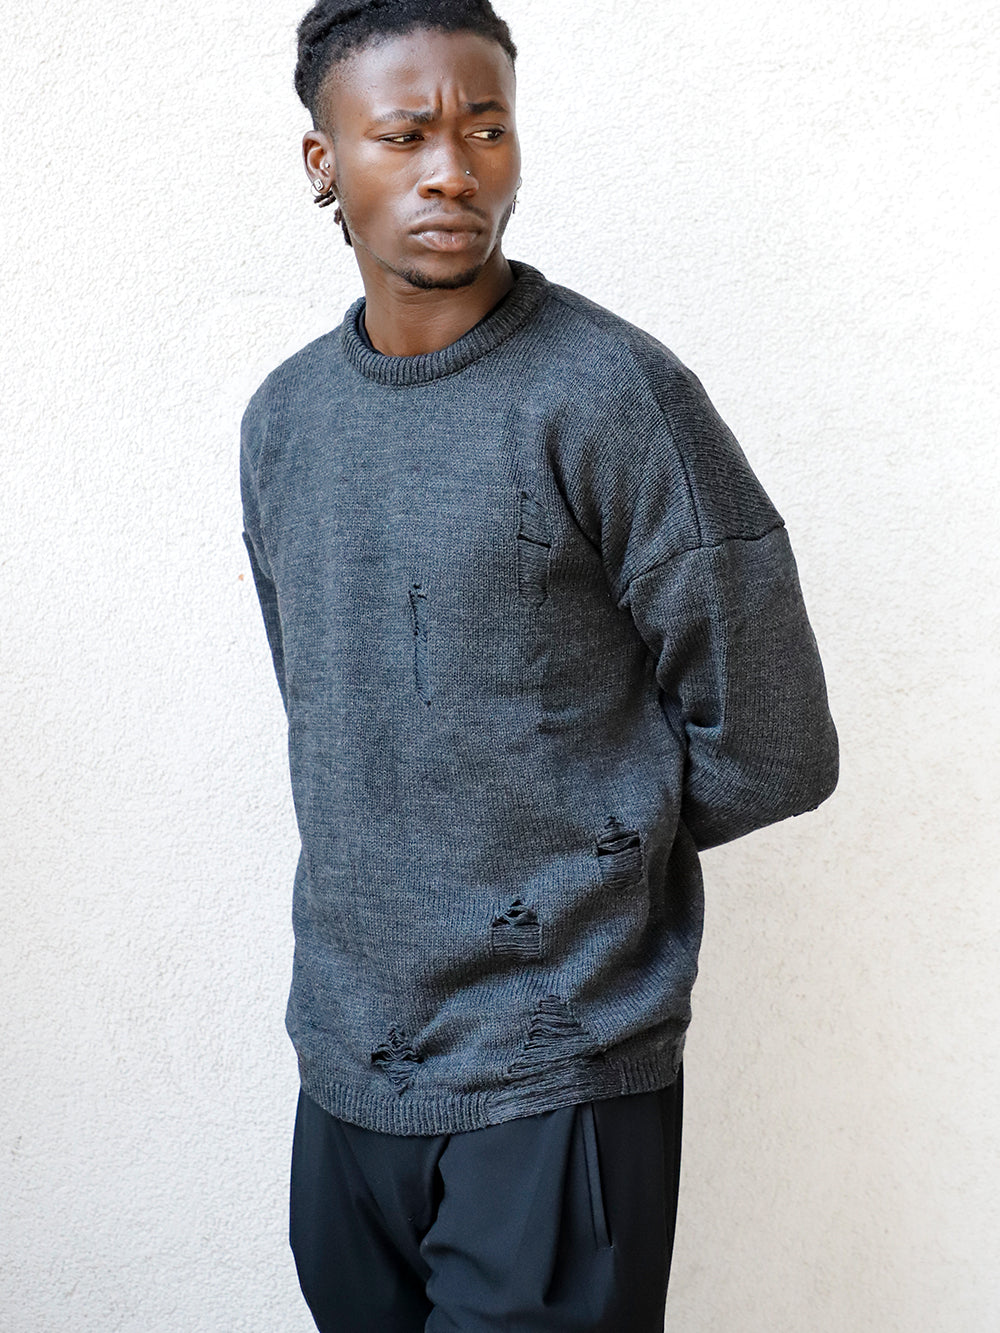 A man wearing a DISTRESSED GENTLEMAN SWEATER | CHARCOAL and black pants.